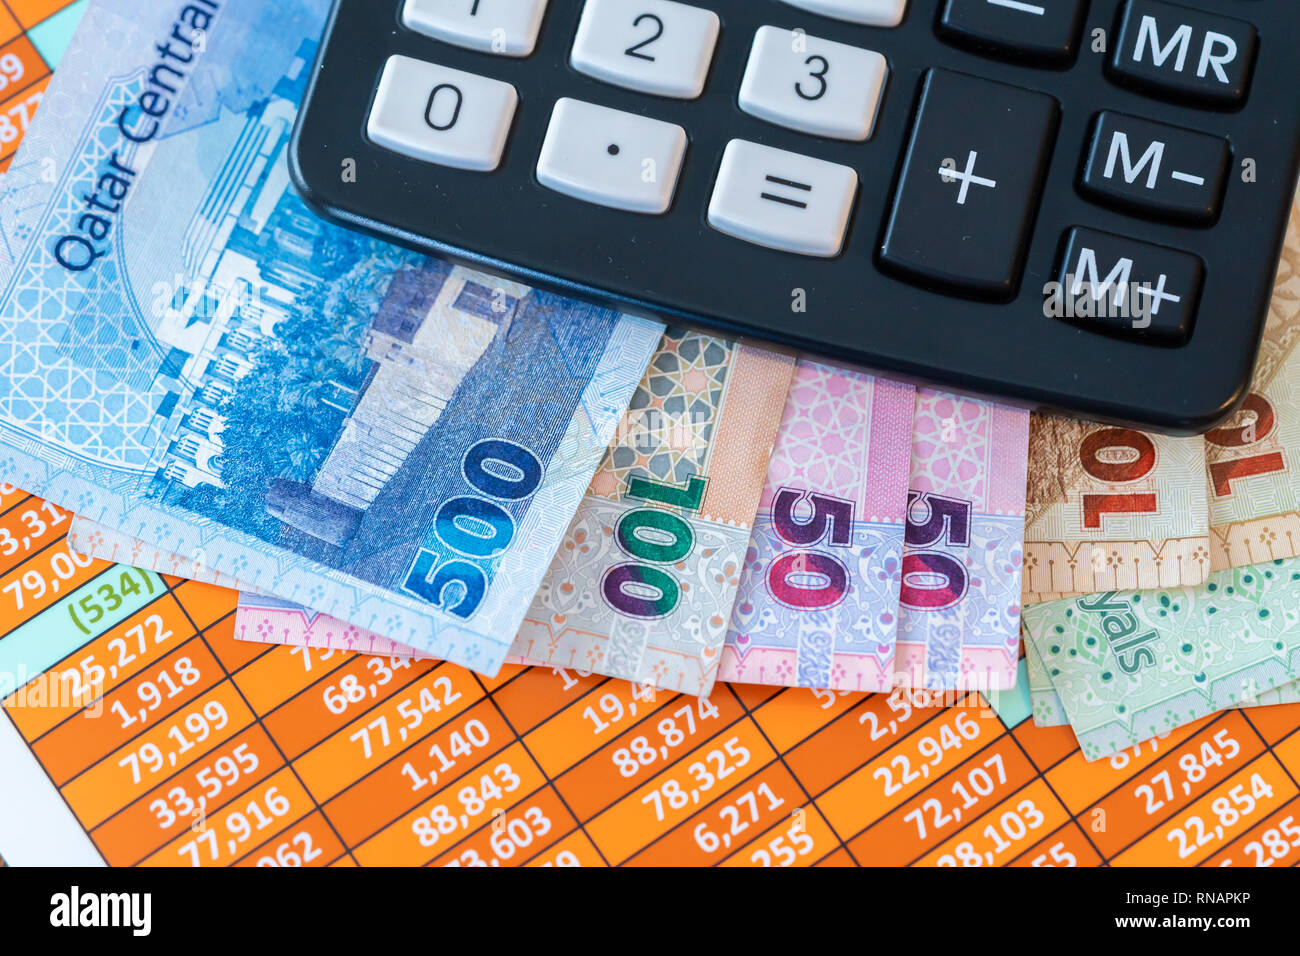 Qatar Riyal Bank Notes on spreadsheet report background With Calculator  Stock Photo - Alamy